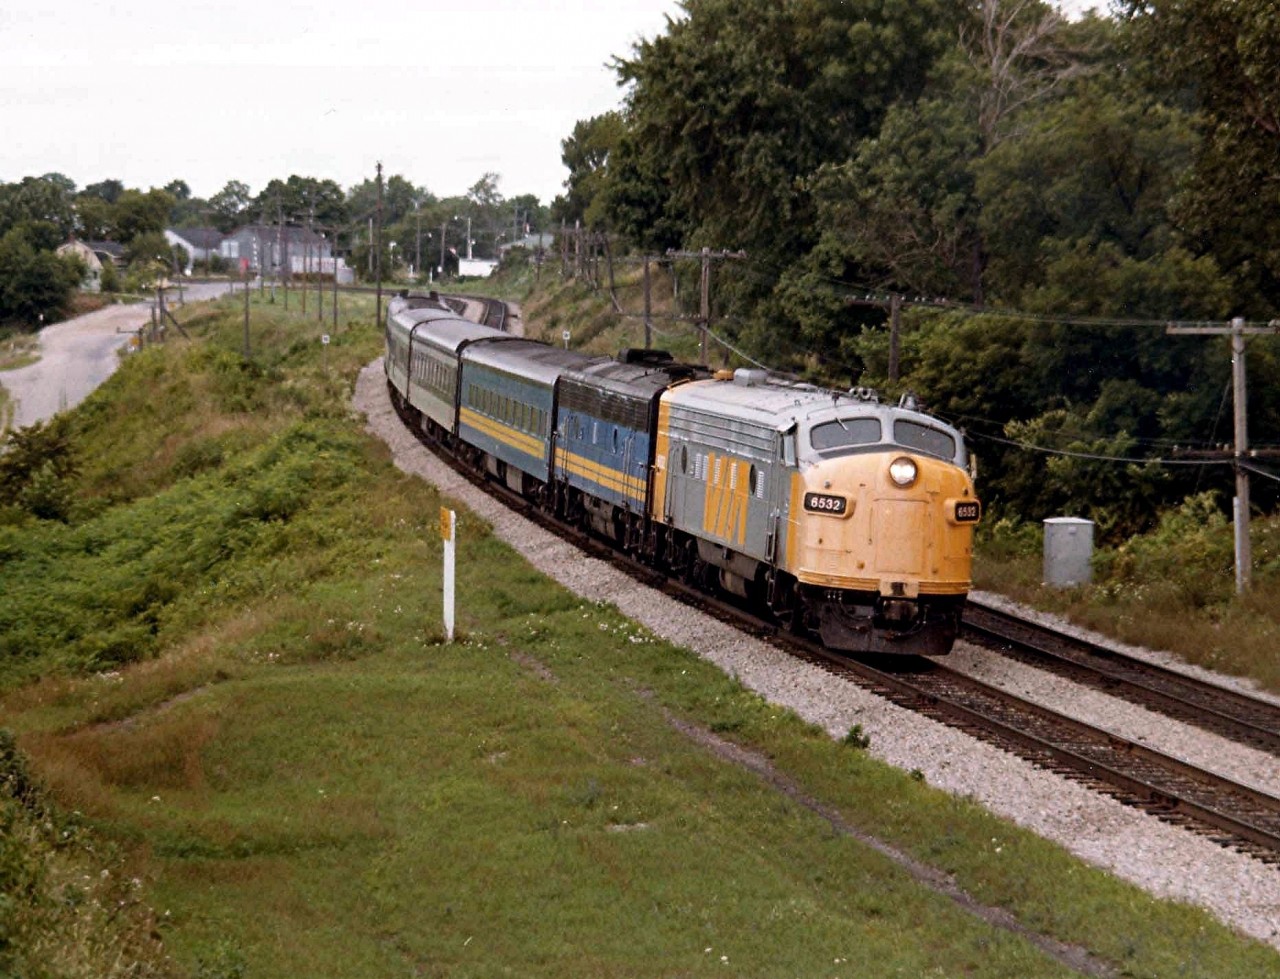 Back in the summer of 1980, word got around that VIA was testing a new paint scheme. And on this overcast August day the opportunity to capture an image of this one-of-a-kind made itself presentable. So here we have VIA 6532,6630 on an eastbound VIA #72, the leader in my opinion looking as nondescript as the weather. I don't know how long this scheme adorned 6532, but I never saw it again.
Photo taken in the company of fellow Railpictures contributor James Adeney, who also captured this scene,  next to the old John Ave overpass in Paris, Ont., gasp, over 32 years ago already.